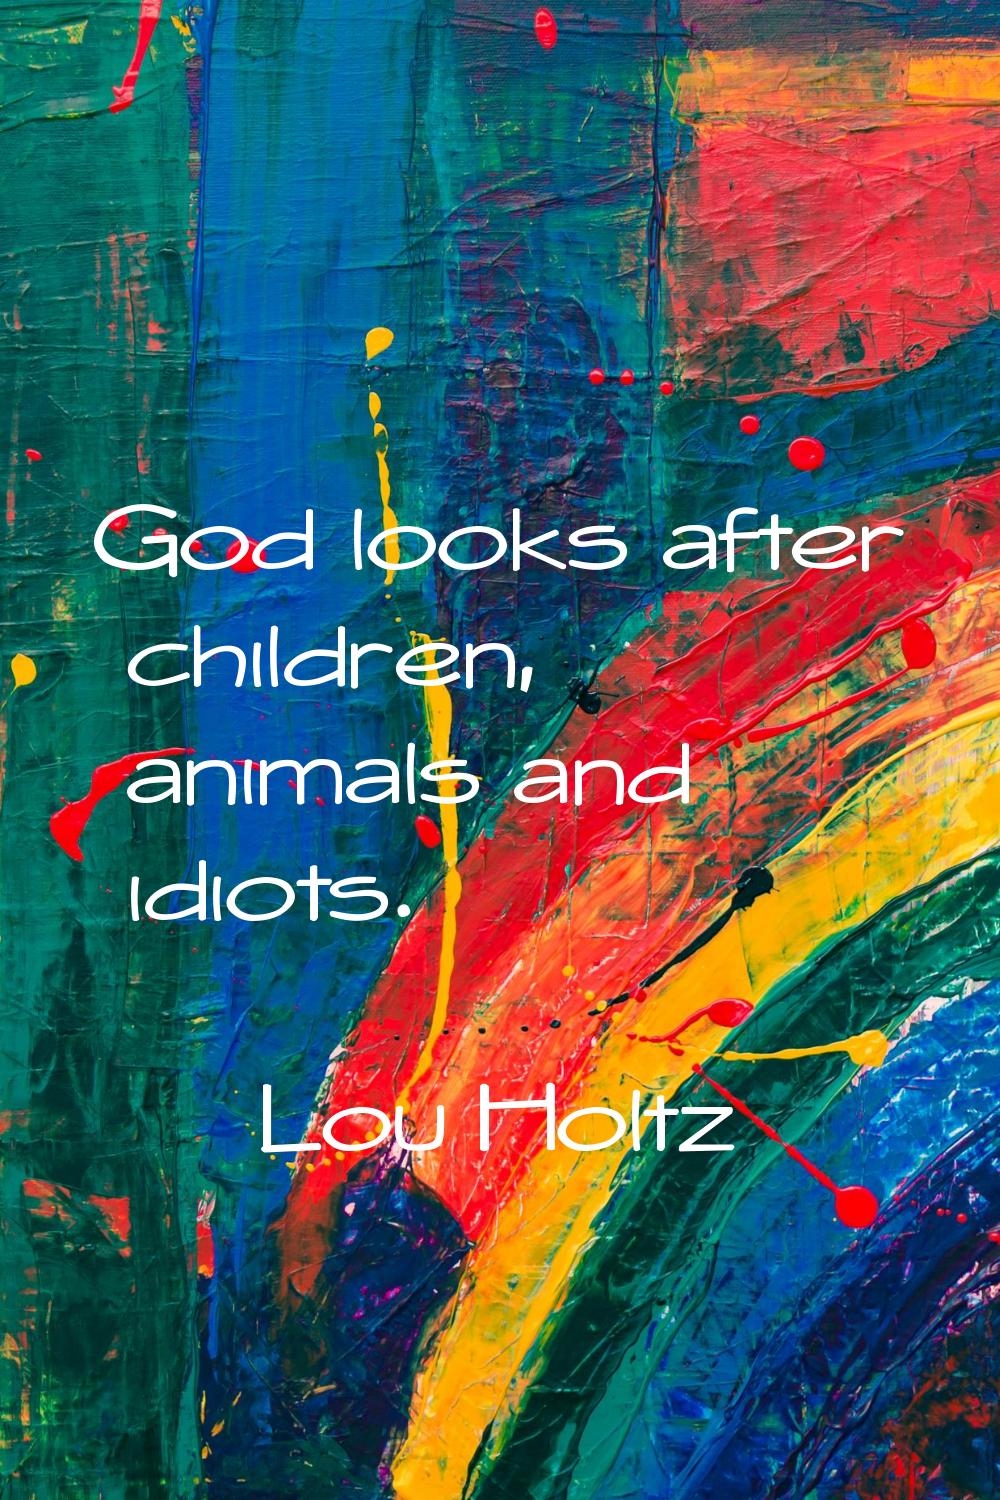 God looks after children, animals and idiots.